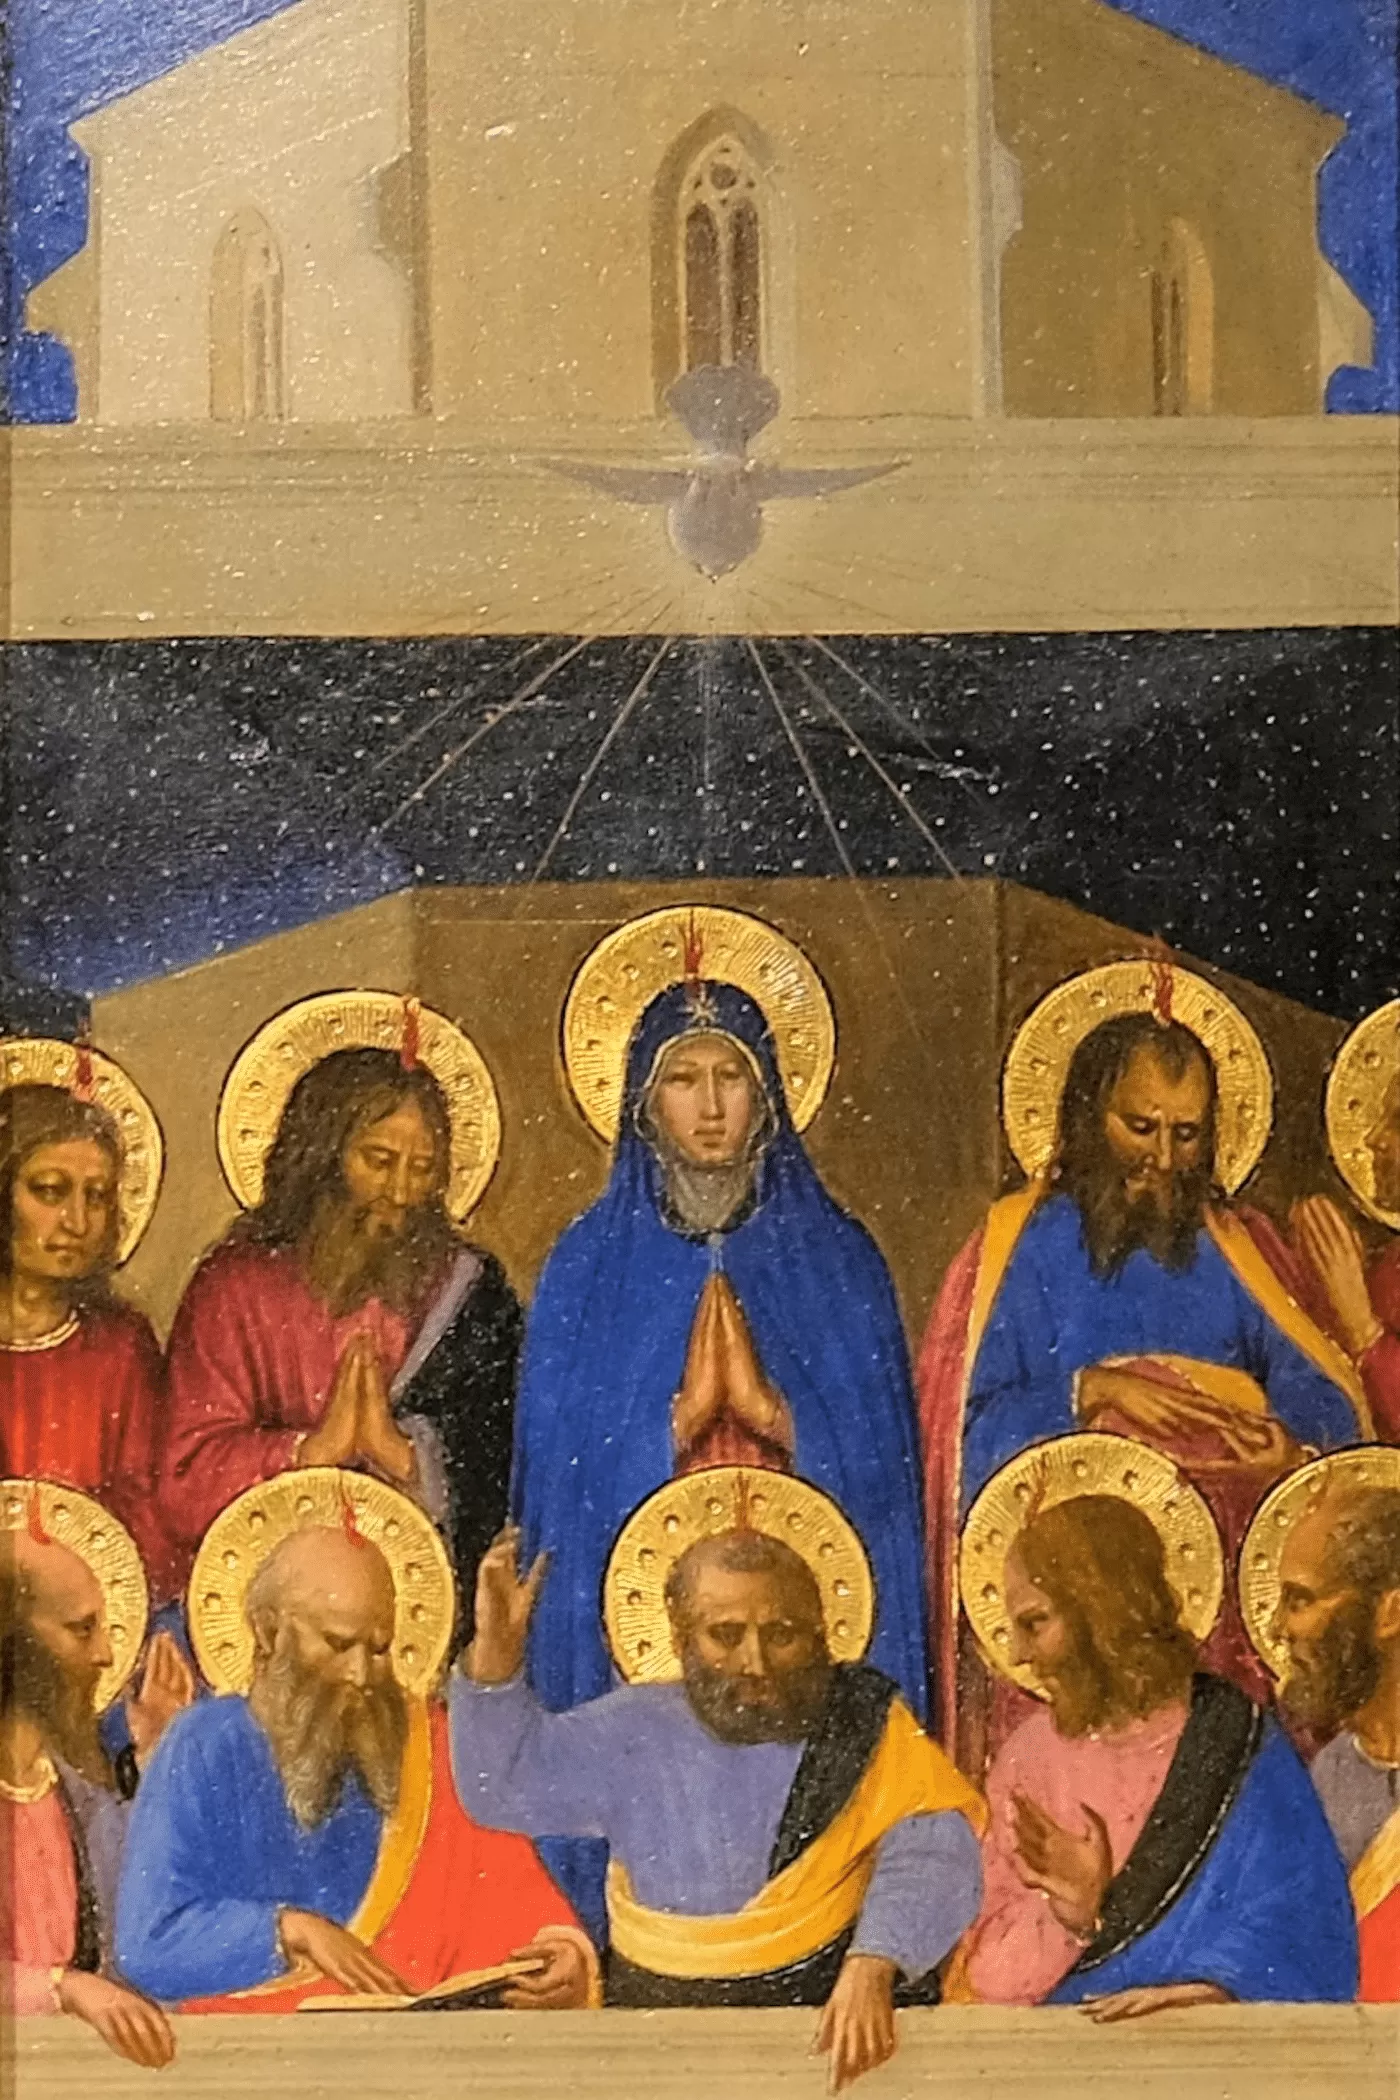 The Third Glorious Mystery: The Holy Spirit Comes Upon the Apostles at Pentecost